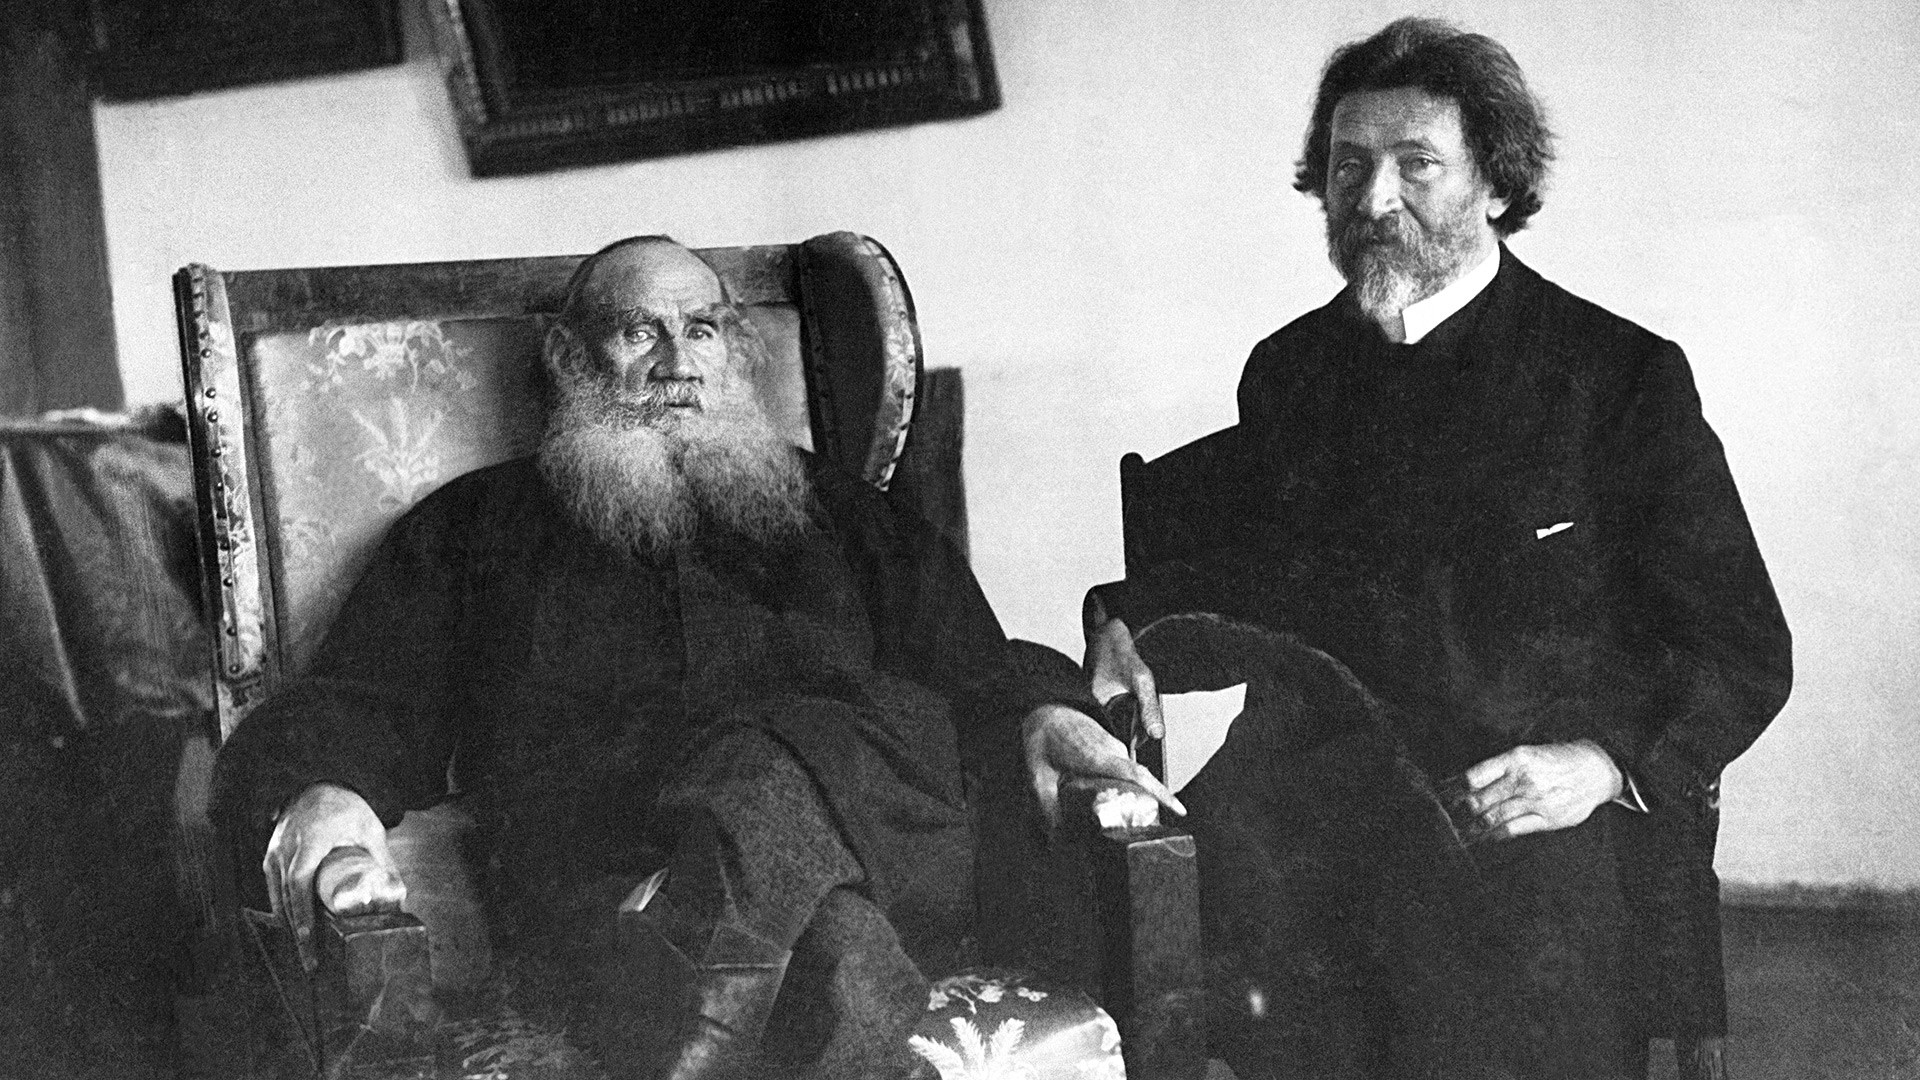 Russian writer Leo Tolstoy (L) and painter Ilya Repin in the Yasnaya Polyana estate of Tolstoy